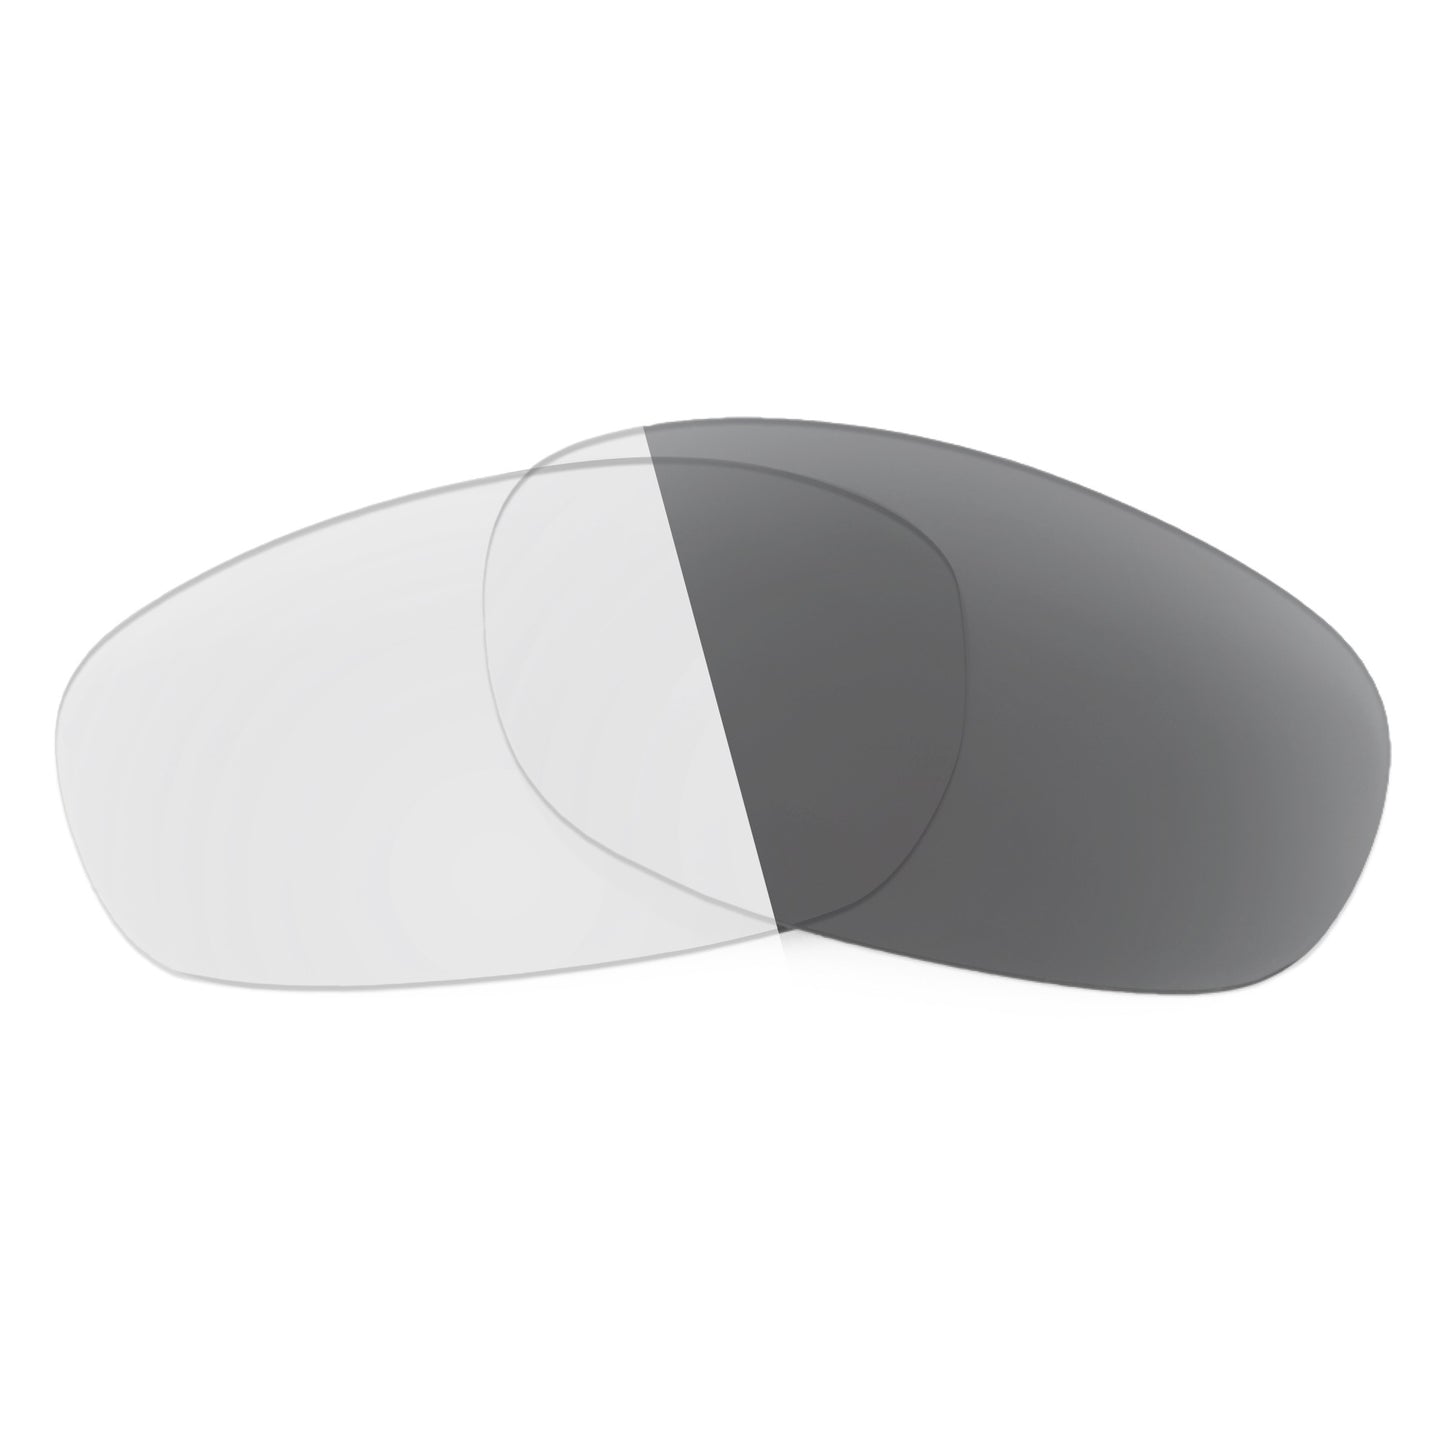 Revant replacement lenses for Ray-Ban Highstreet MS RB3003 Non-Polarized Adapt Gray Photochromic